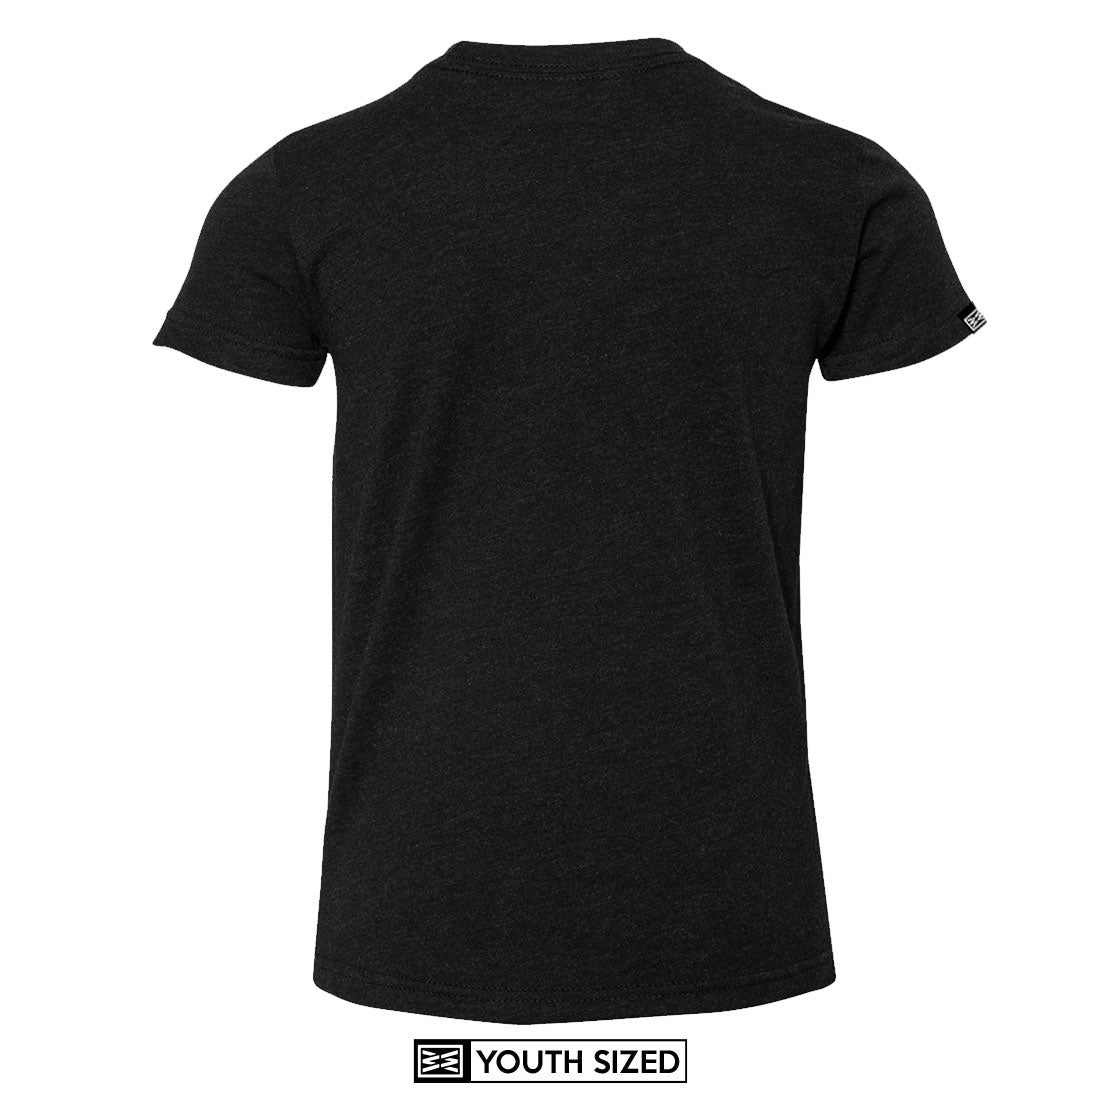 MONUMENT YOUTH TEE IN BLACK HEATHER